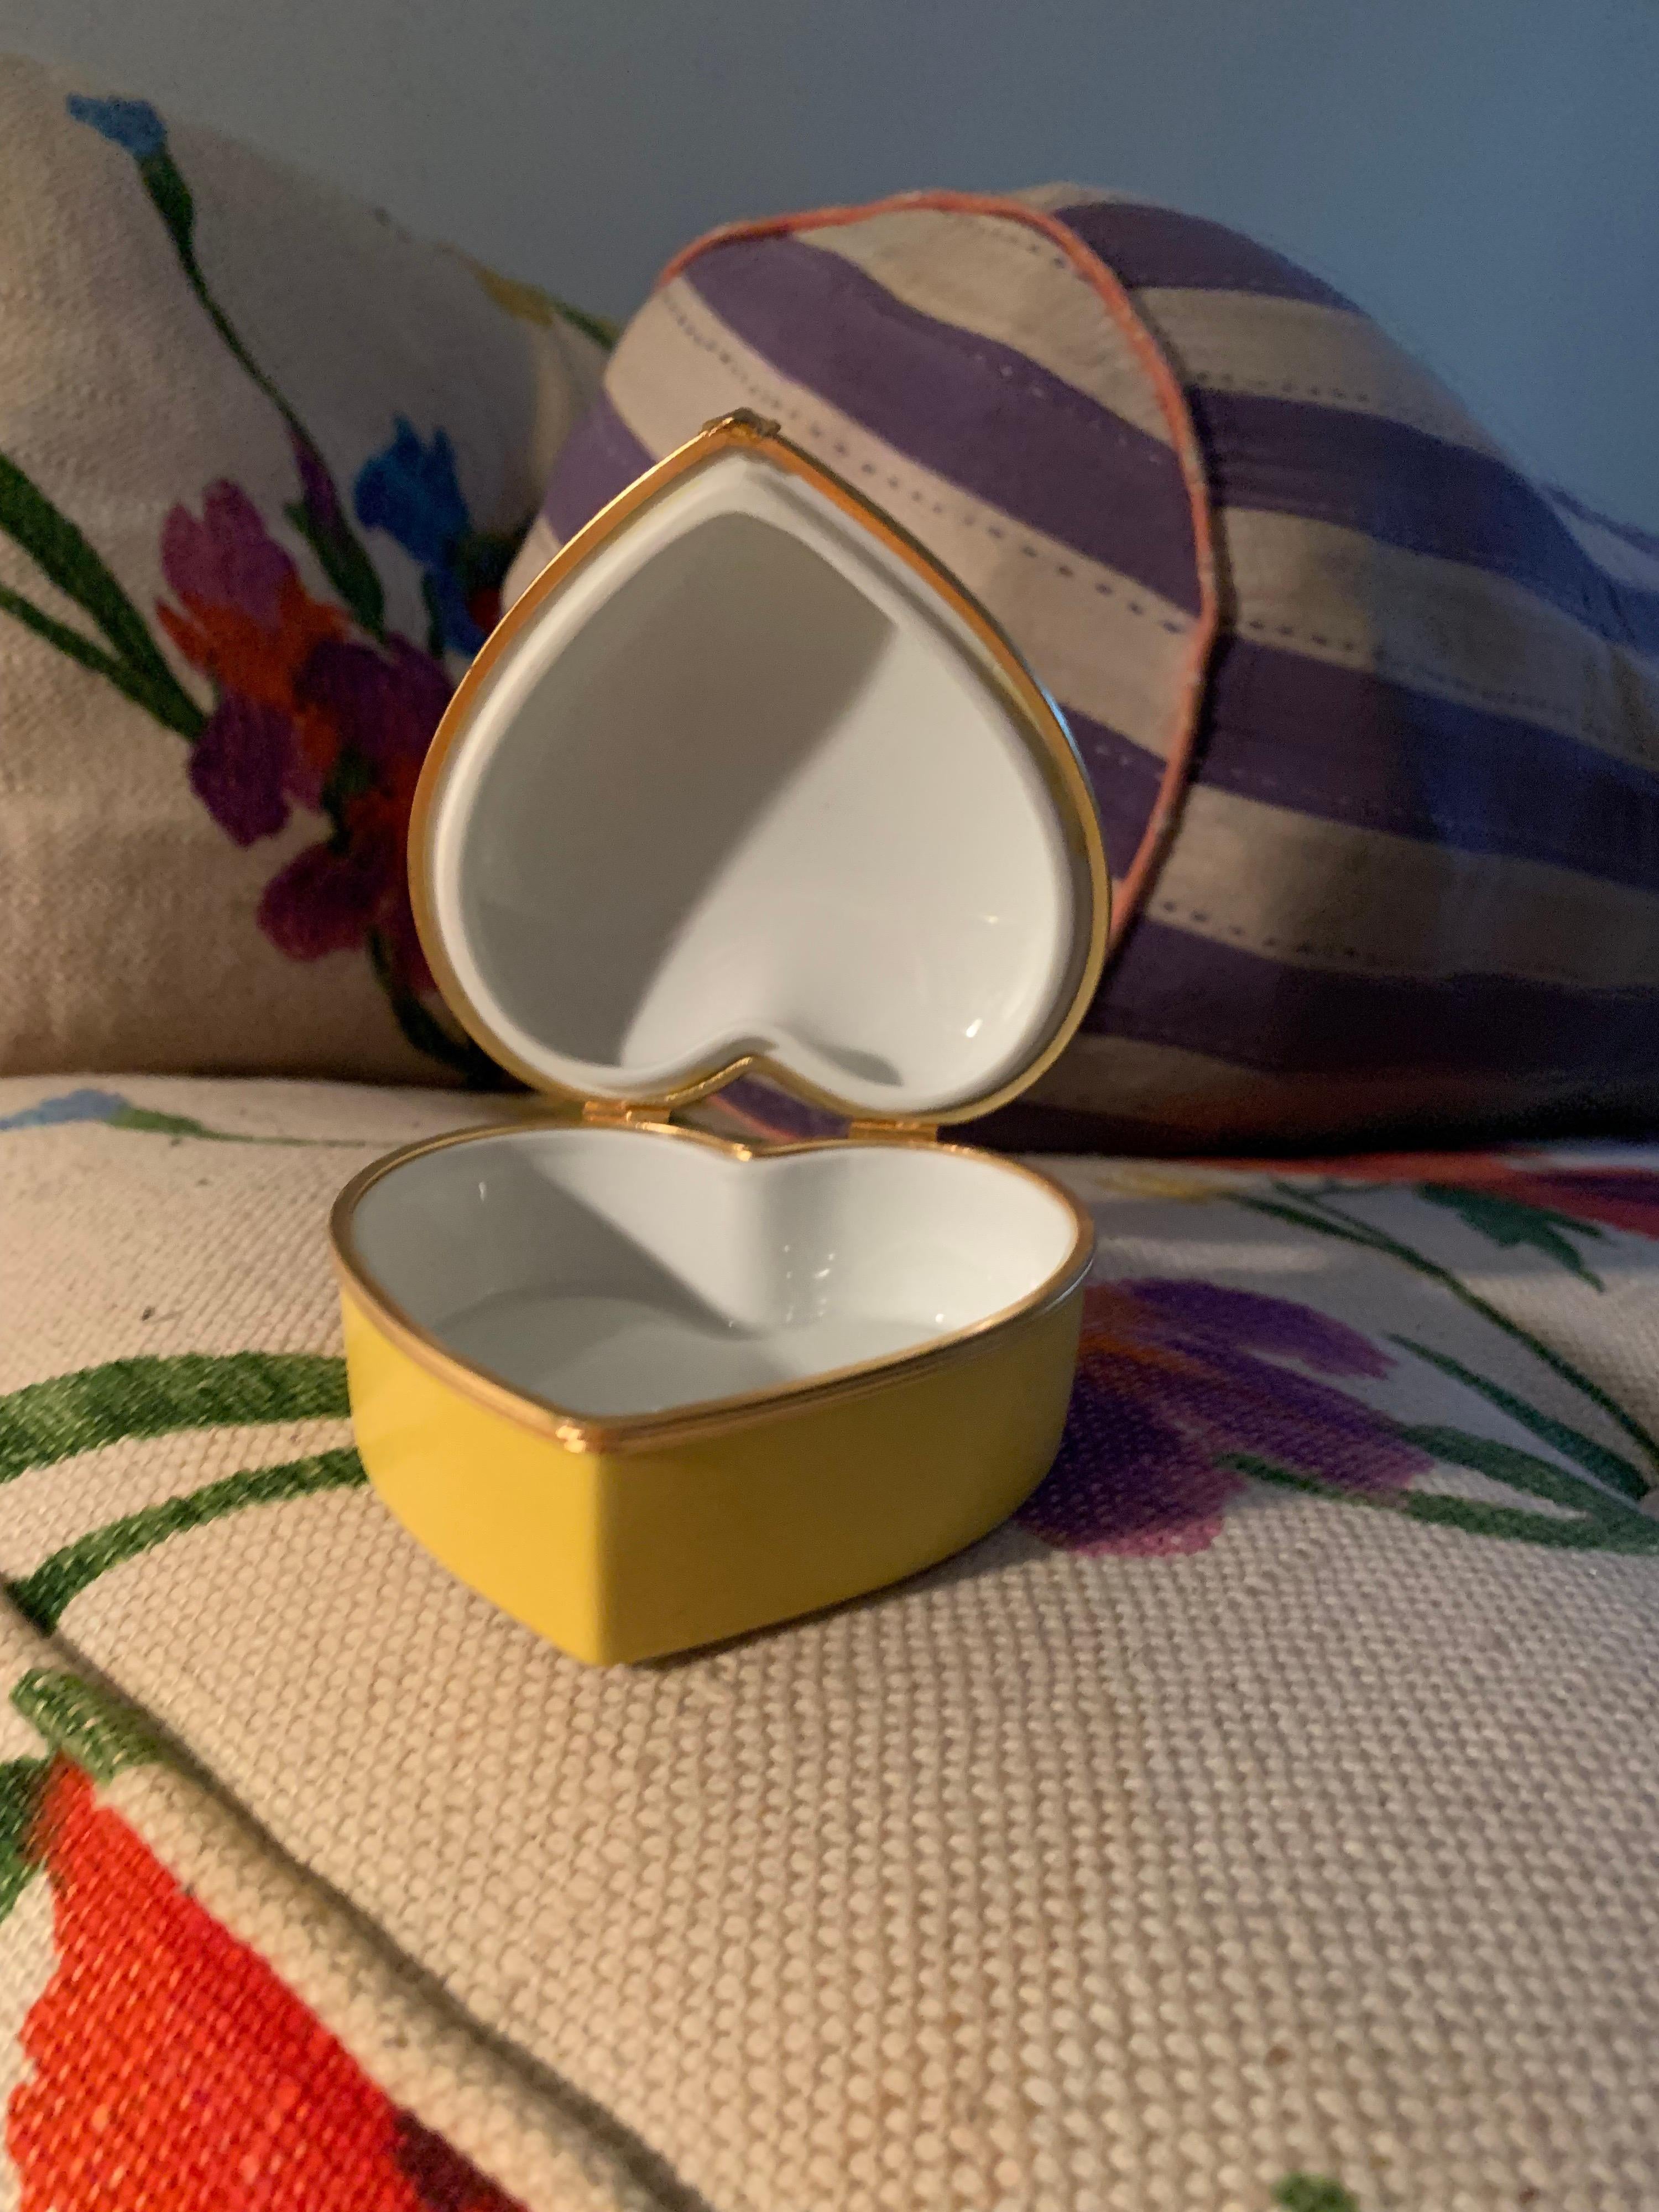 Limoges Porcelain Heart Trinket Box, Canary Yellow, French Porcelain Jewelry Box 8